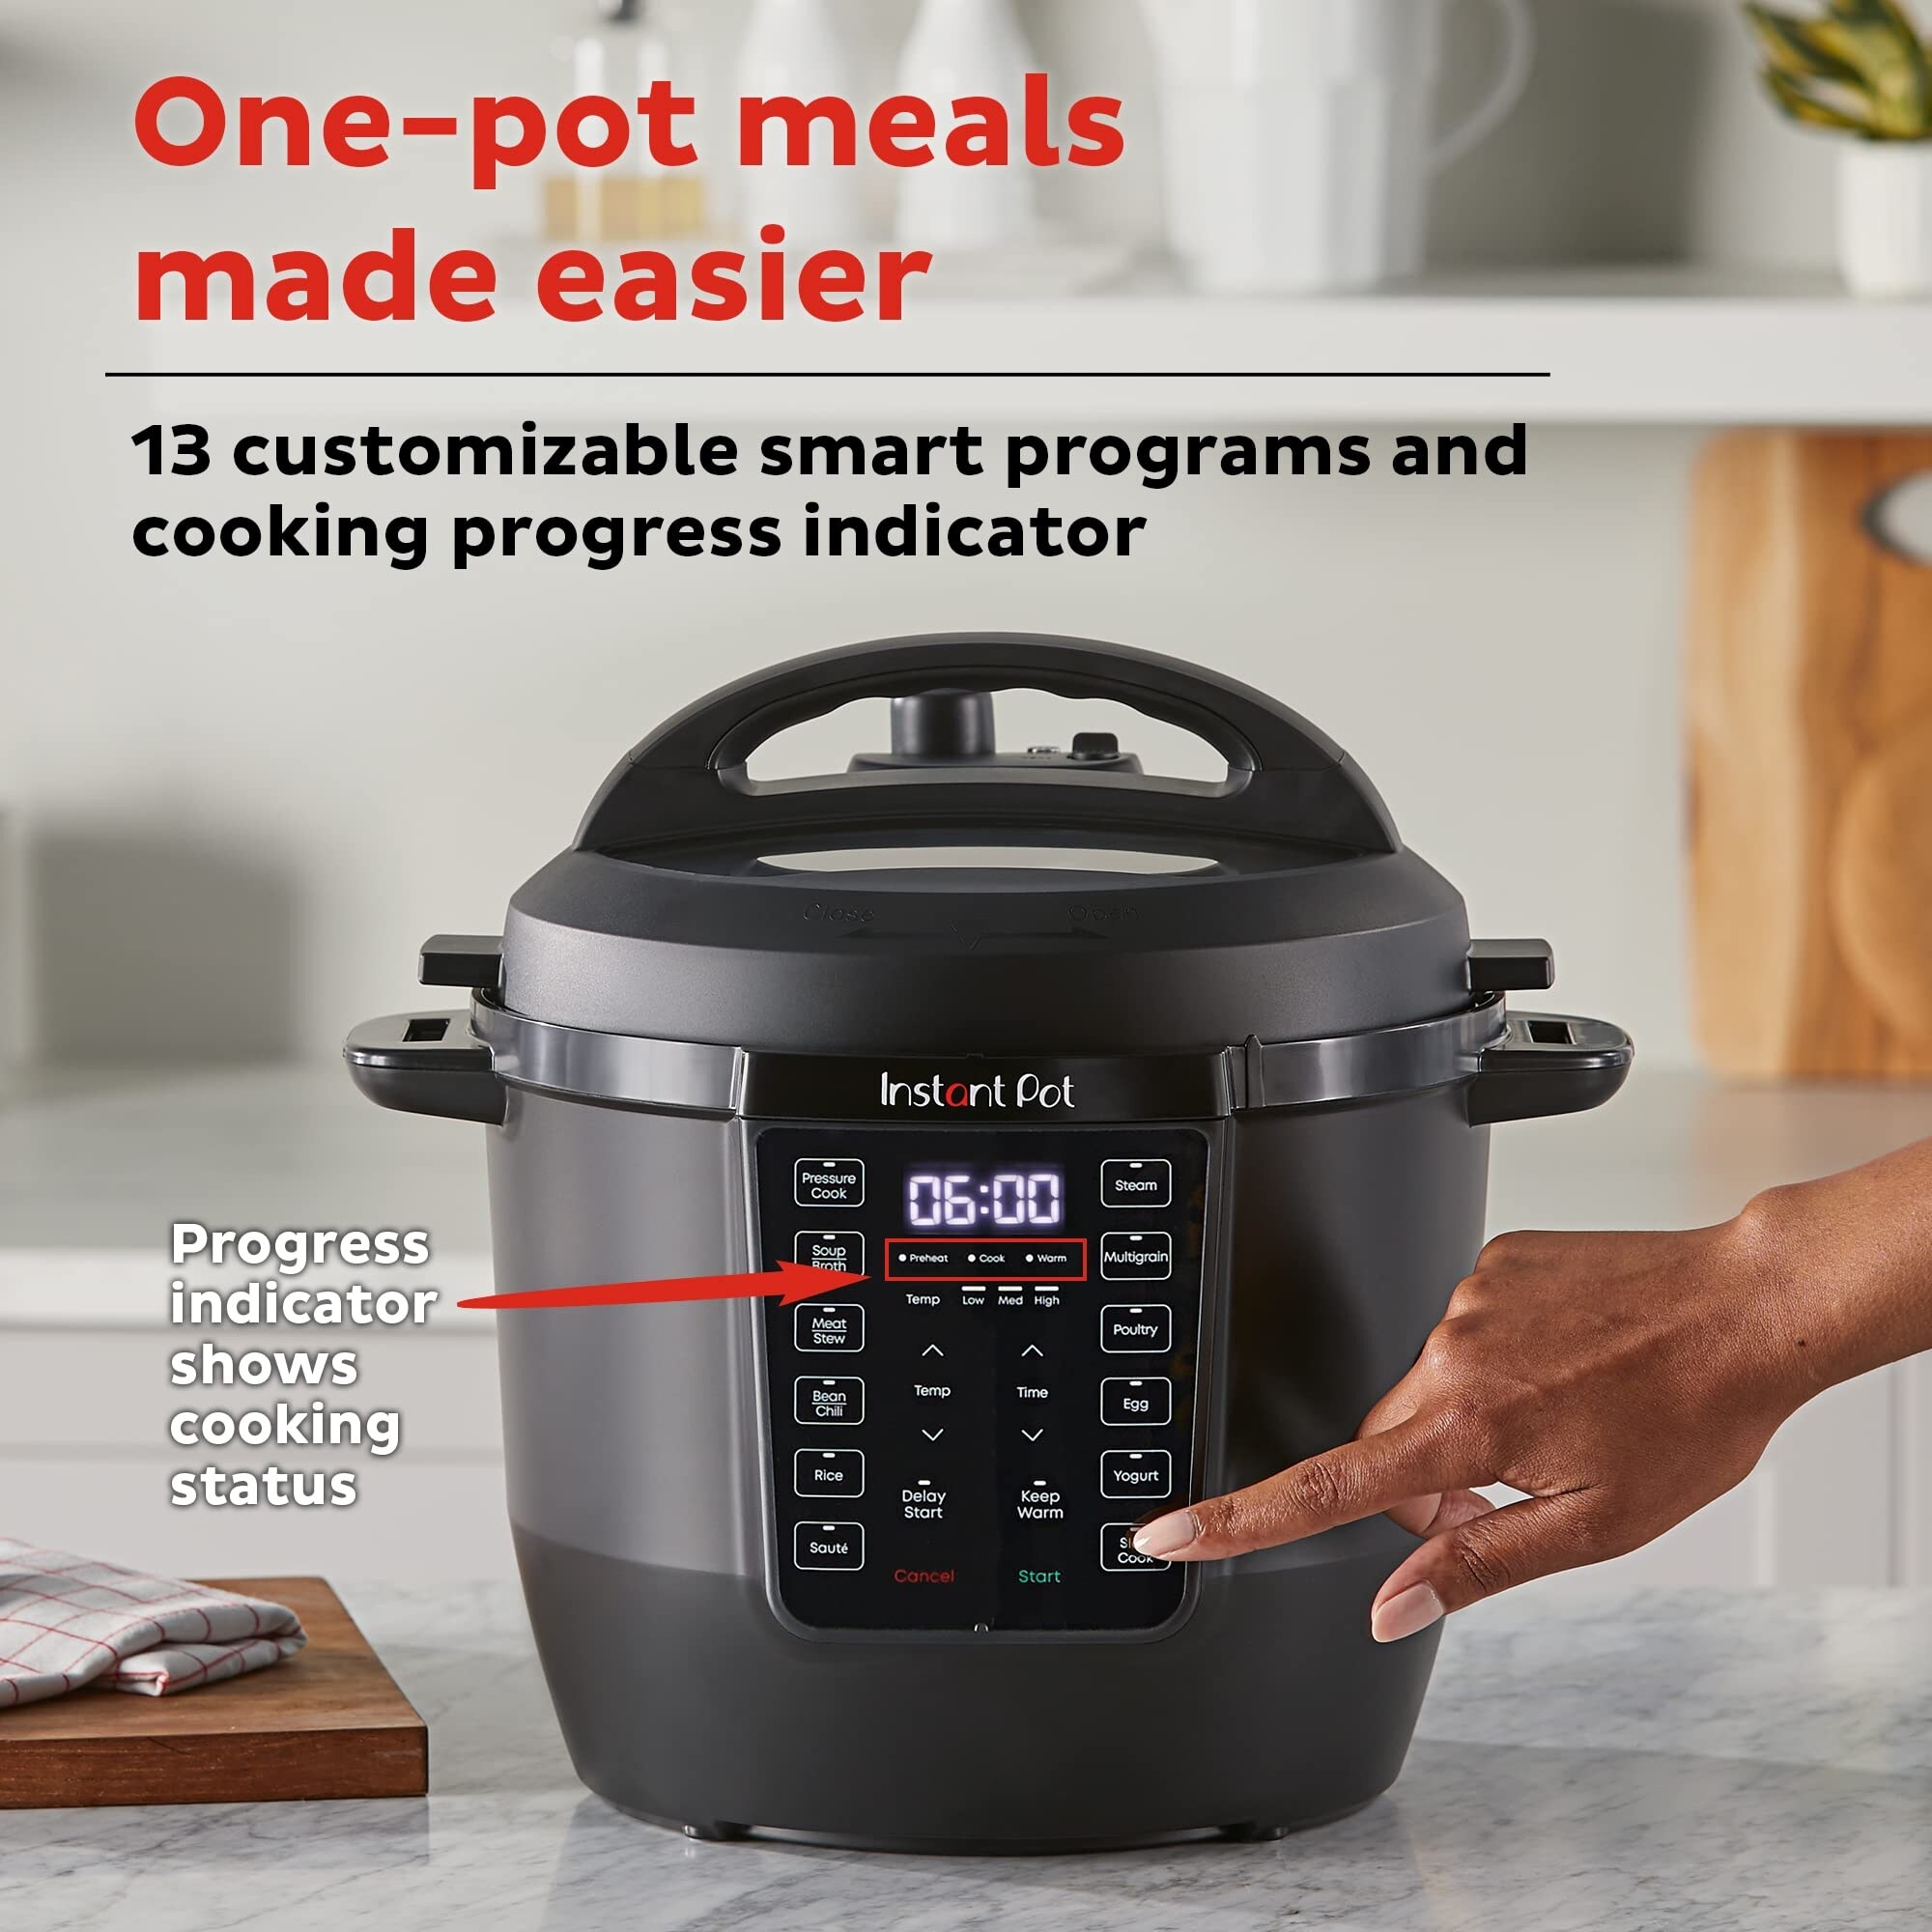 https://ak1.ostkcdn.com/images/products/is/images/direct/bd8eb09f35b308b81042332566ff9ab5ad0140cf/6-Quart-Electric-Multi-Cooker%2C-Pressure-Cooker%2C-Slow-Rice-Steamer%2C-Yogurt-Maker%2C-%26-Warmer%2C-Includes-App-With-Over-800-Recipes.jpg